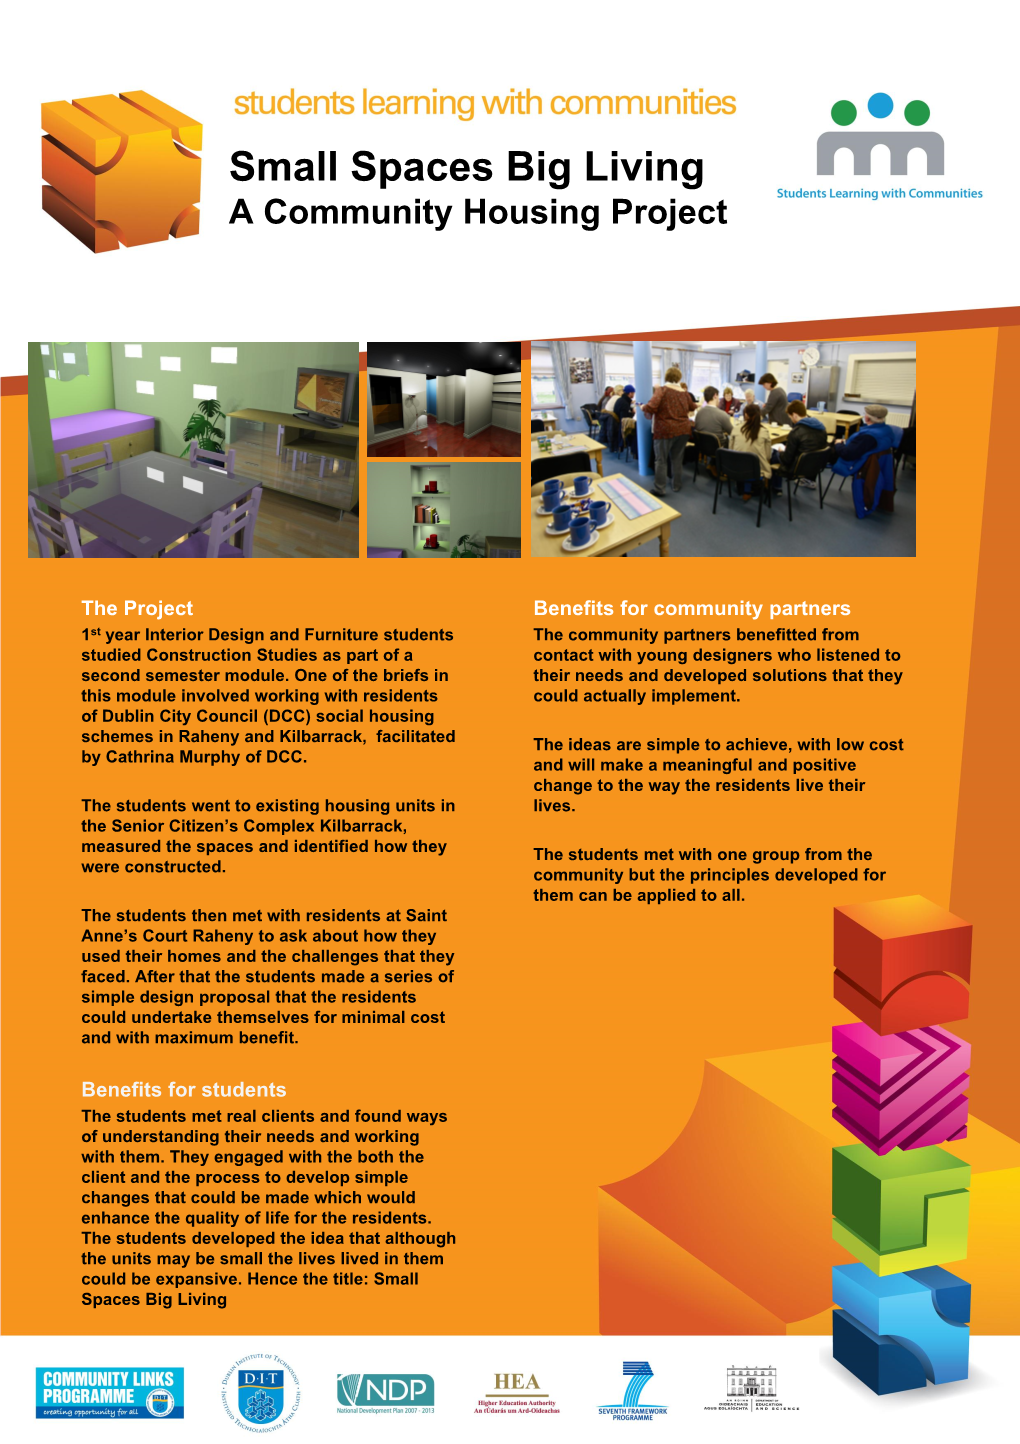 A Community Housing Project